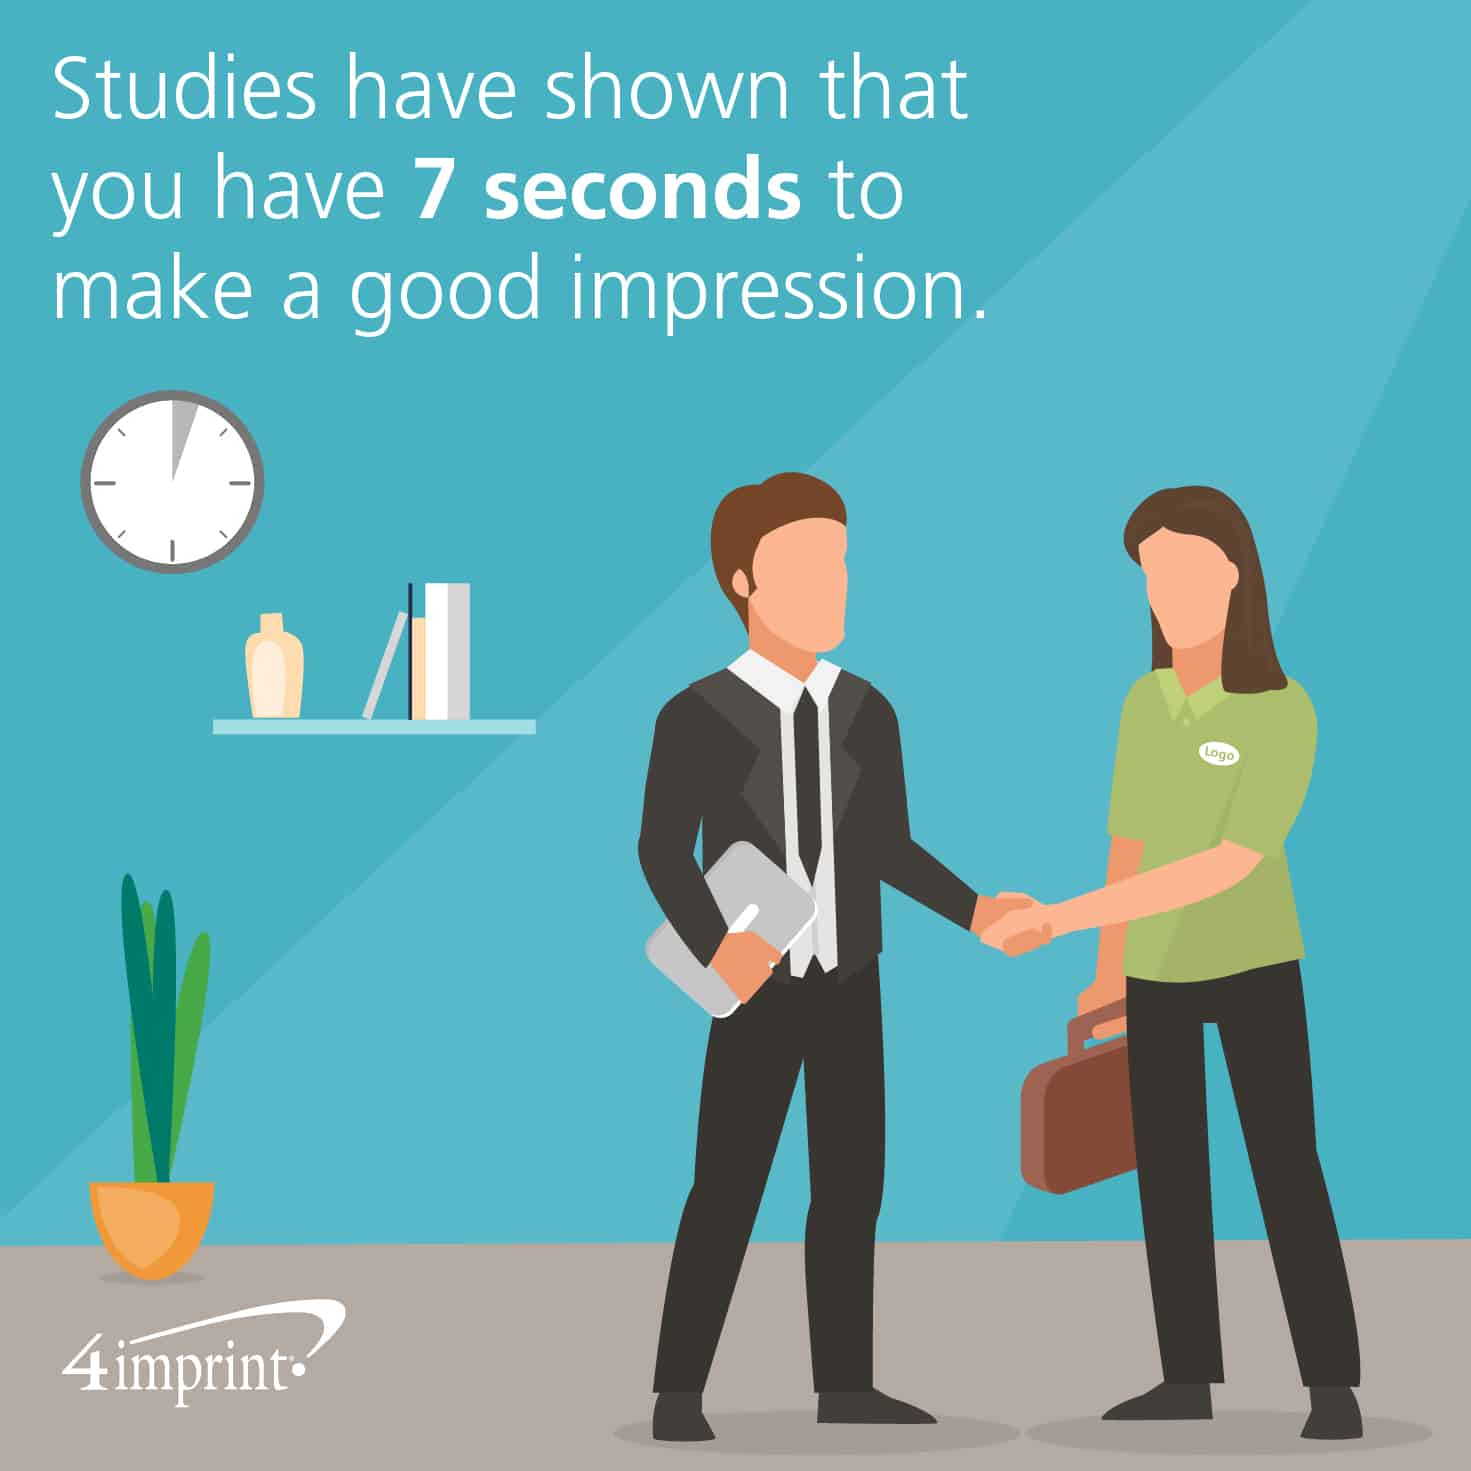 Studies have shown that you have 7 seconds to make a good impression. Get ideas for trade show giveaways that will help make a good impression.